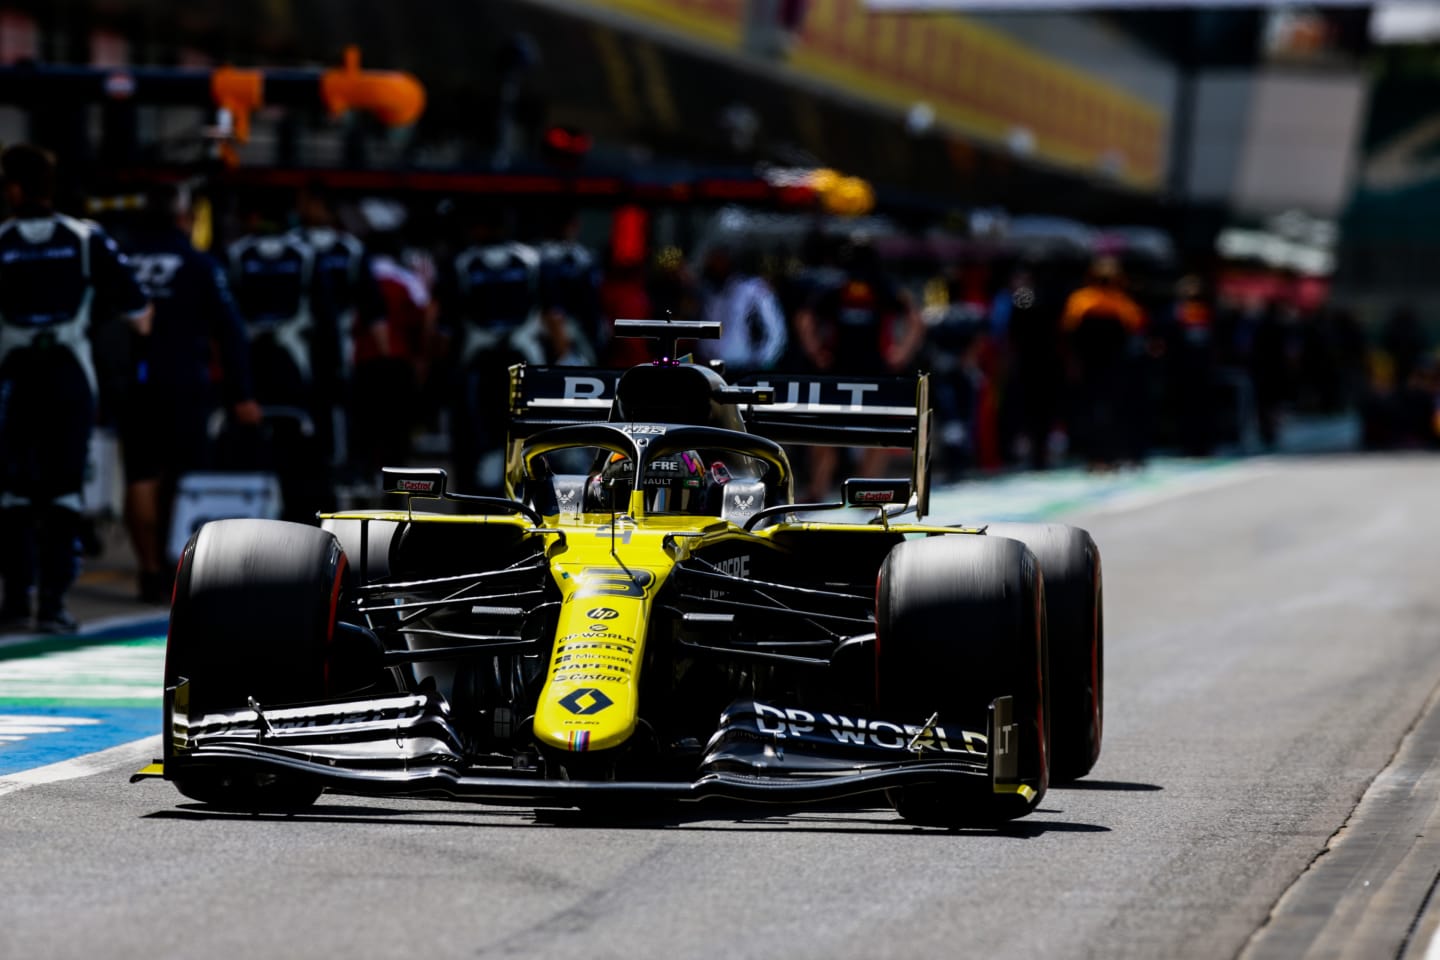 NORTHAMPTON, ENGLAND - AUGUST 02:  Daniel Ricciardo of Australia and Renault during the F1 Grand Prix of Great Britain at Silverstone on August 02, 2020 in Northampton, England. (Photo by Peter Fox/Getty Images)